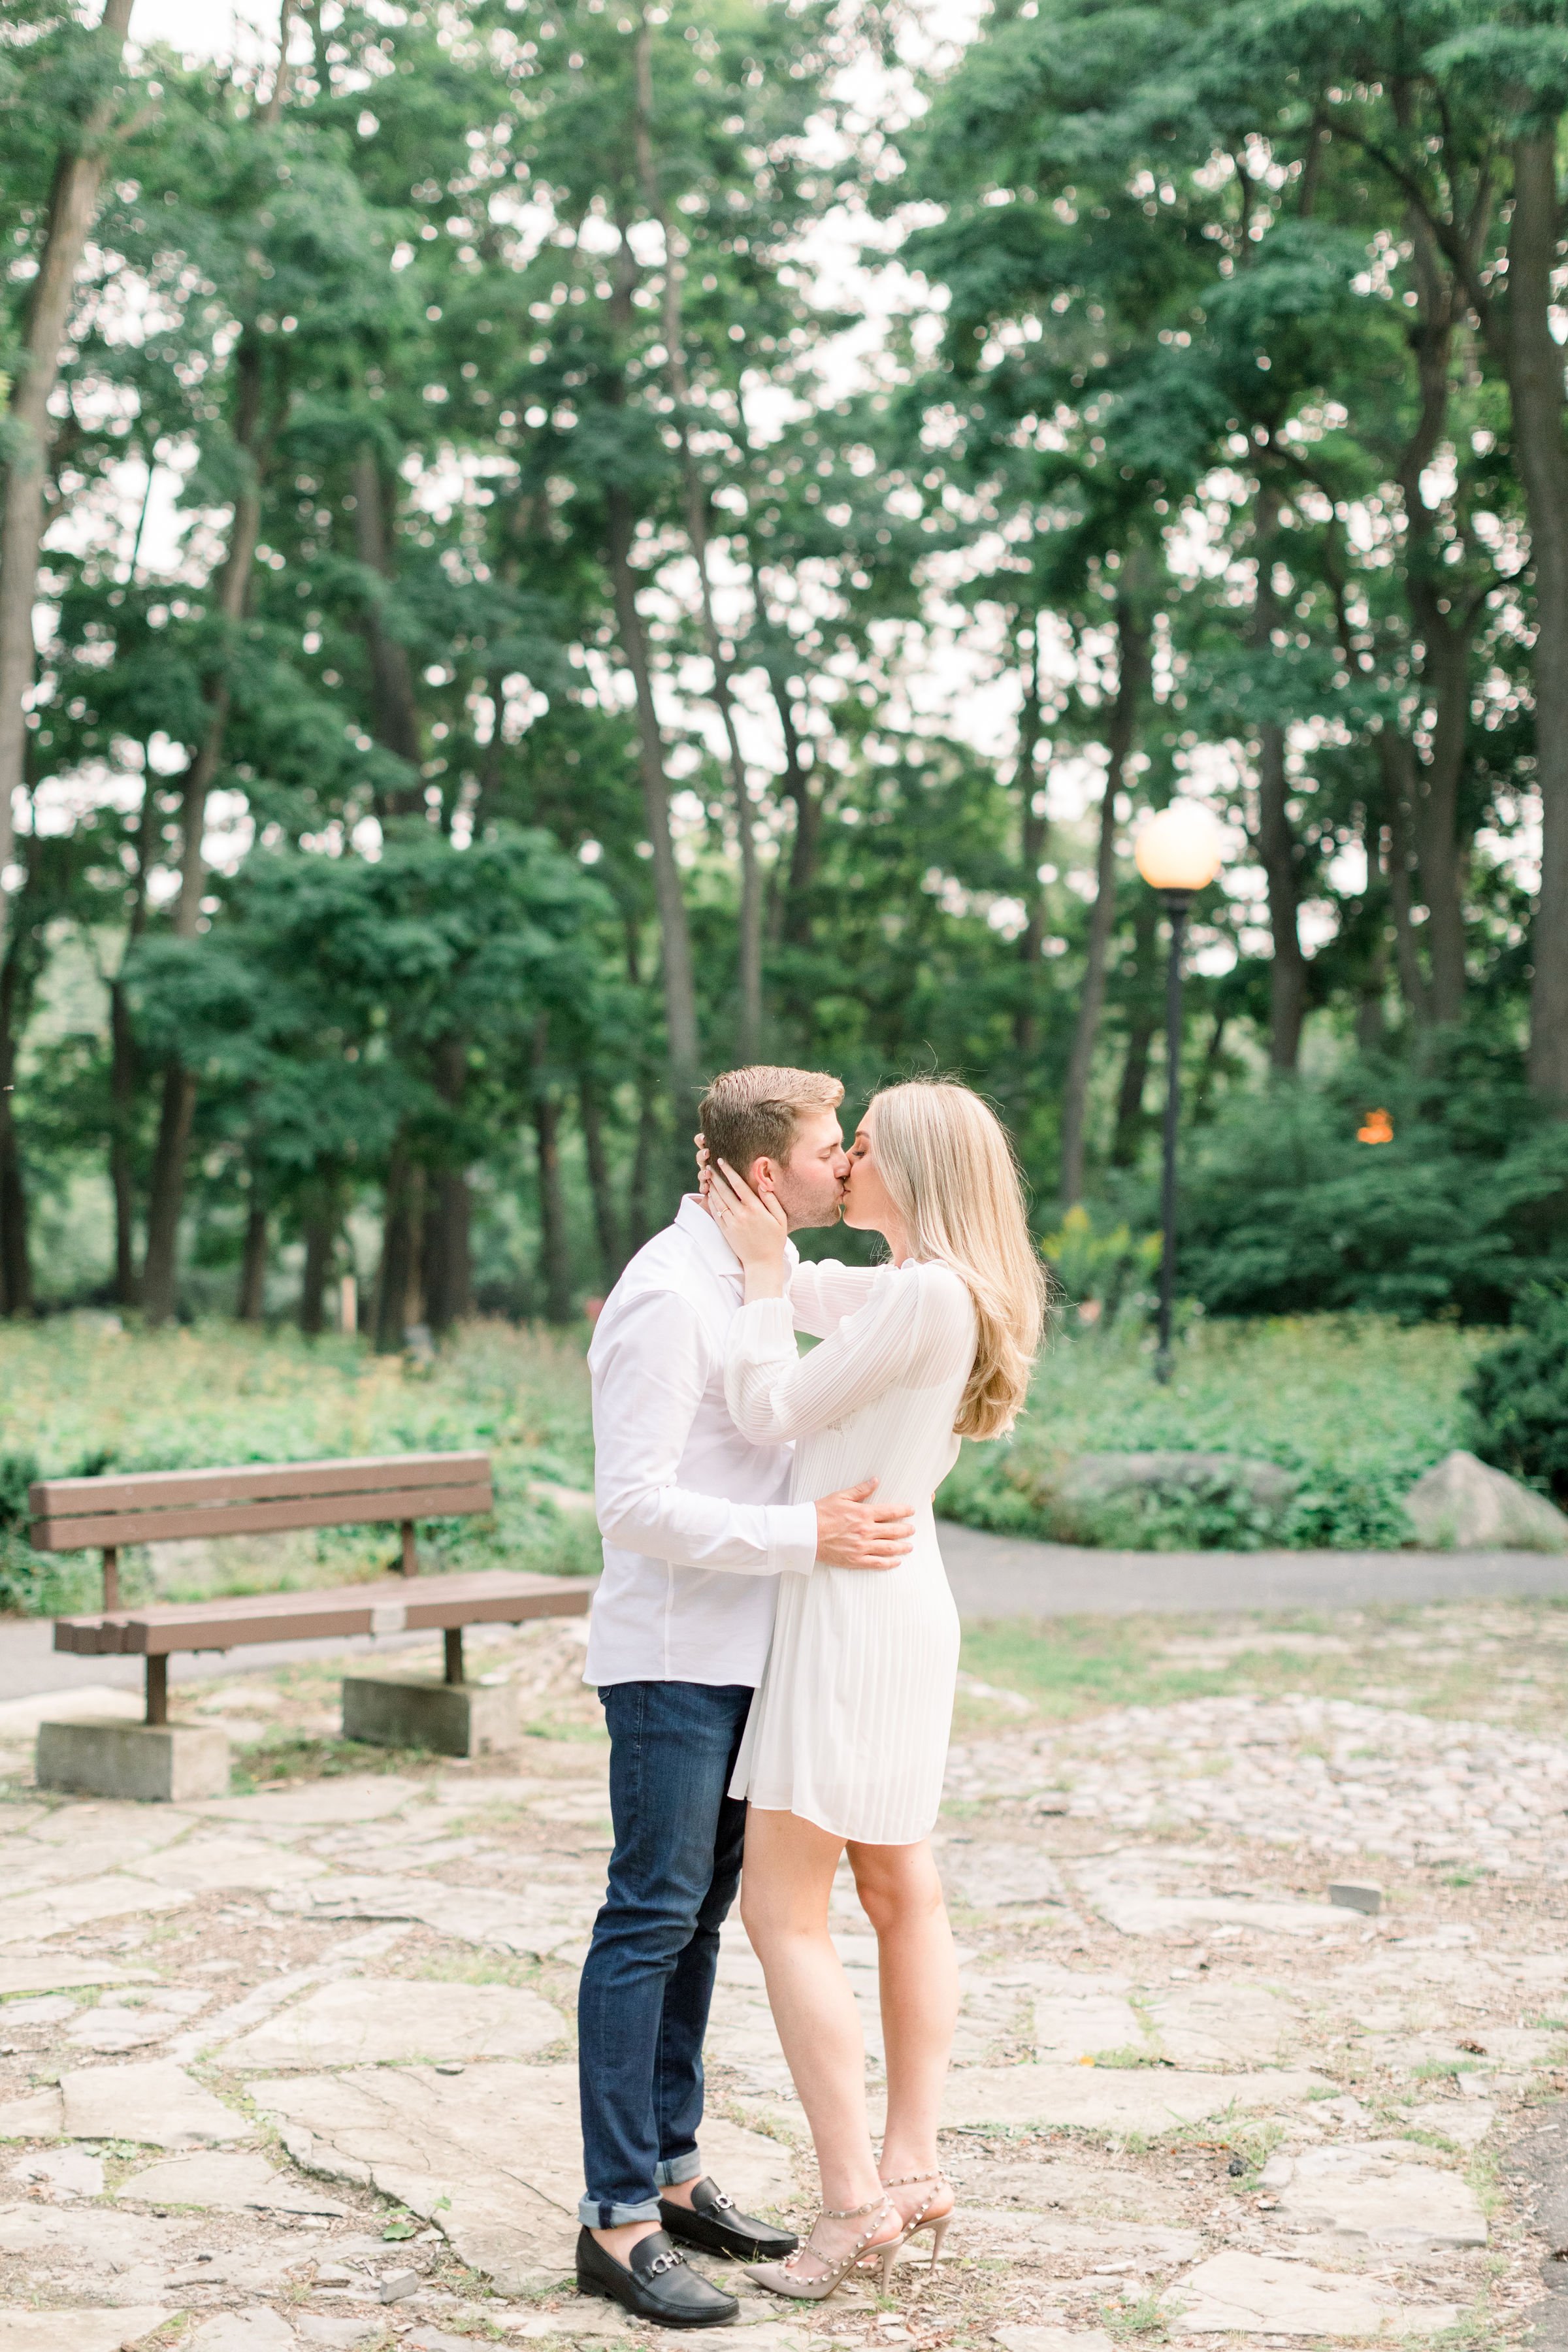  A couple kisses while standing on a stone pathway in an Ottawa park by Chelsea Mason Photography. kissing fiances wedding pictures #Ottawaengagements #Ottawaweddingphotographers #engagementwithdogs #ChelseaMasonPhotography #ChelseaMasonEngagements  